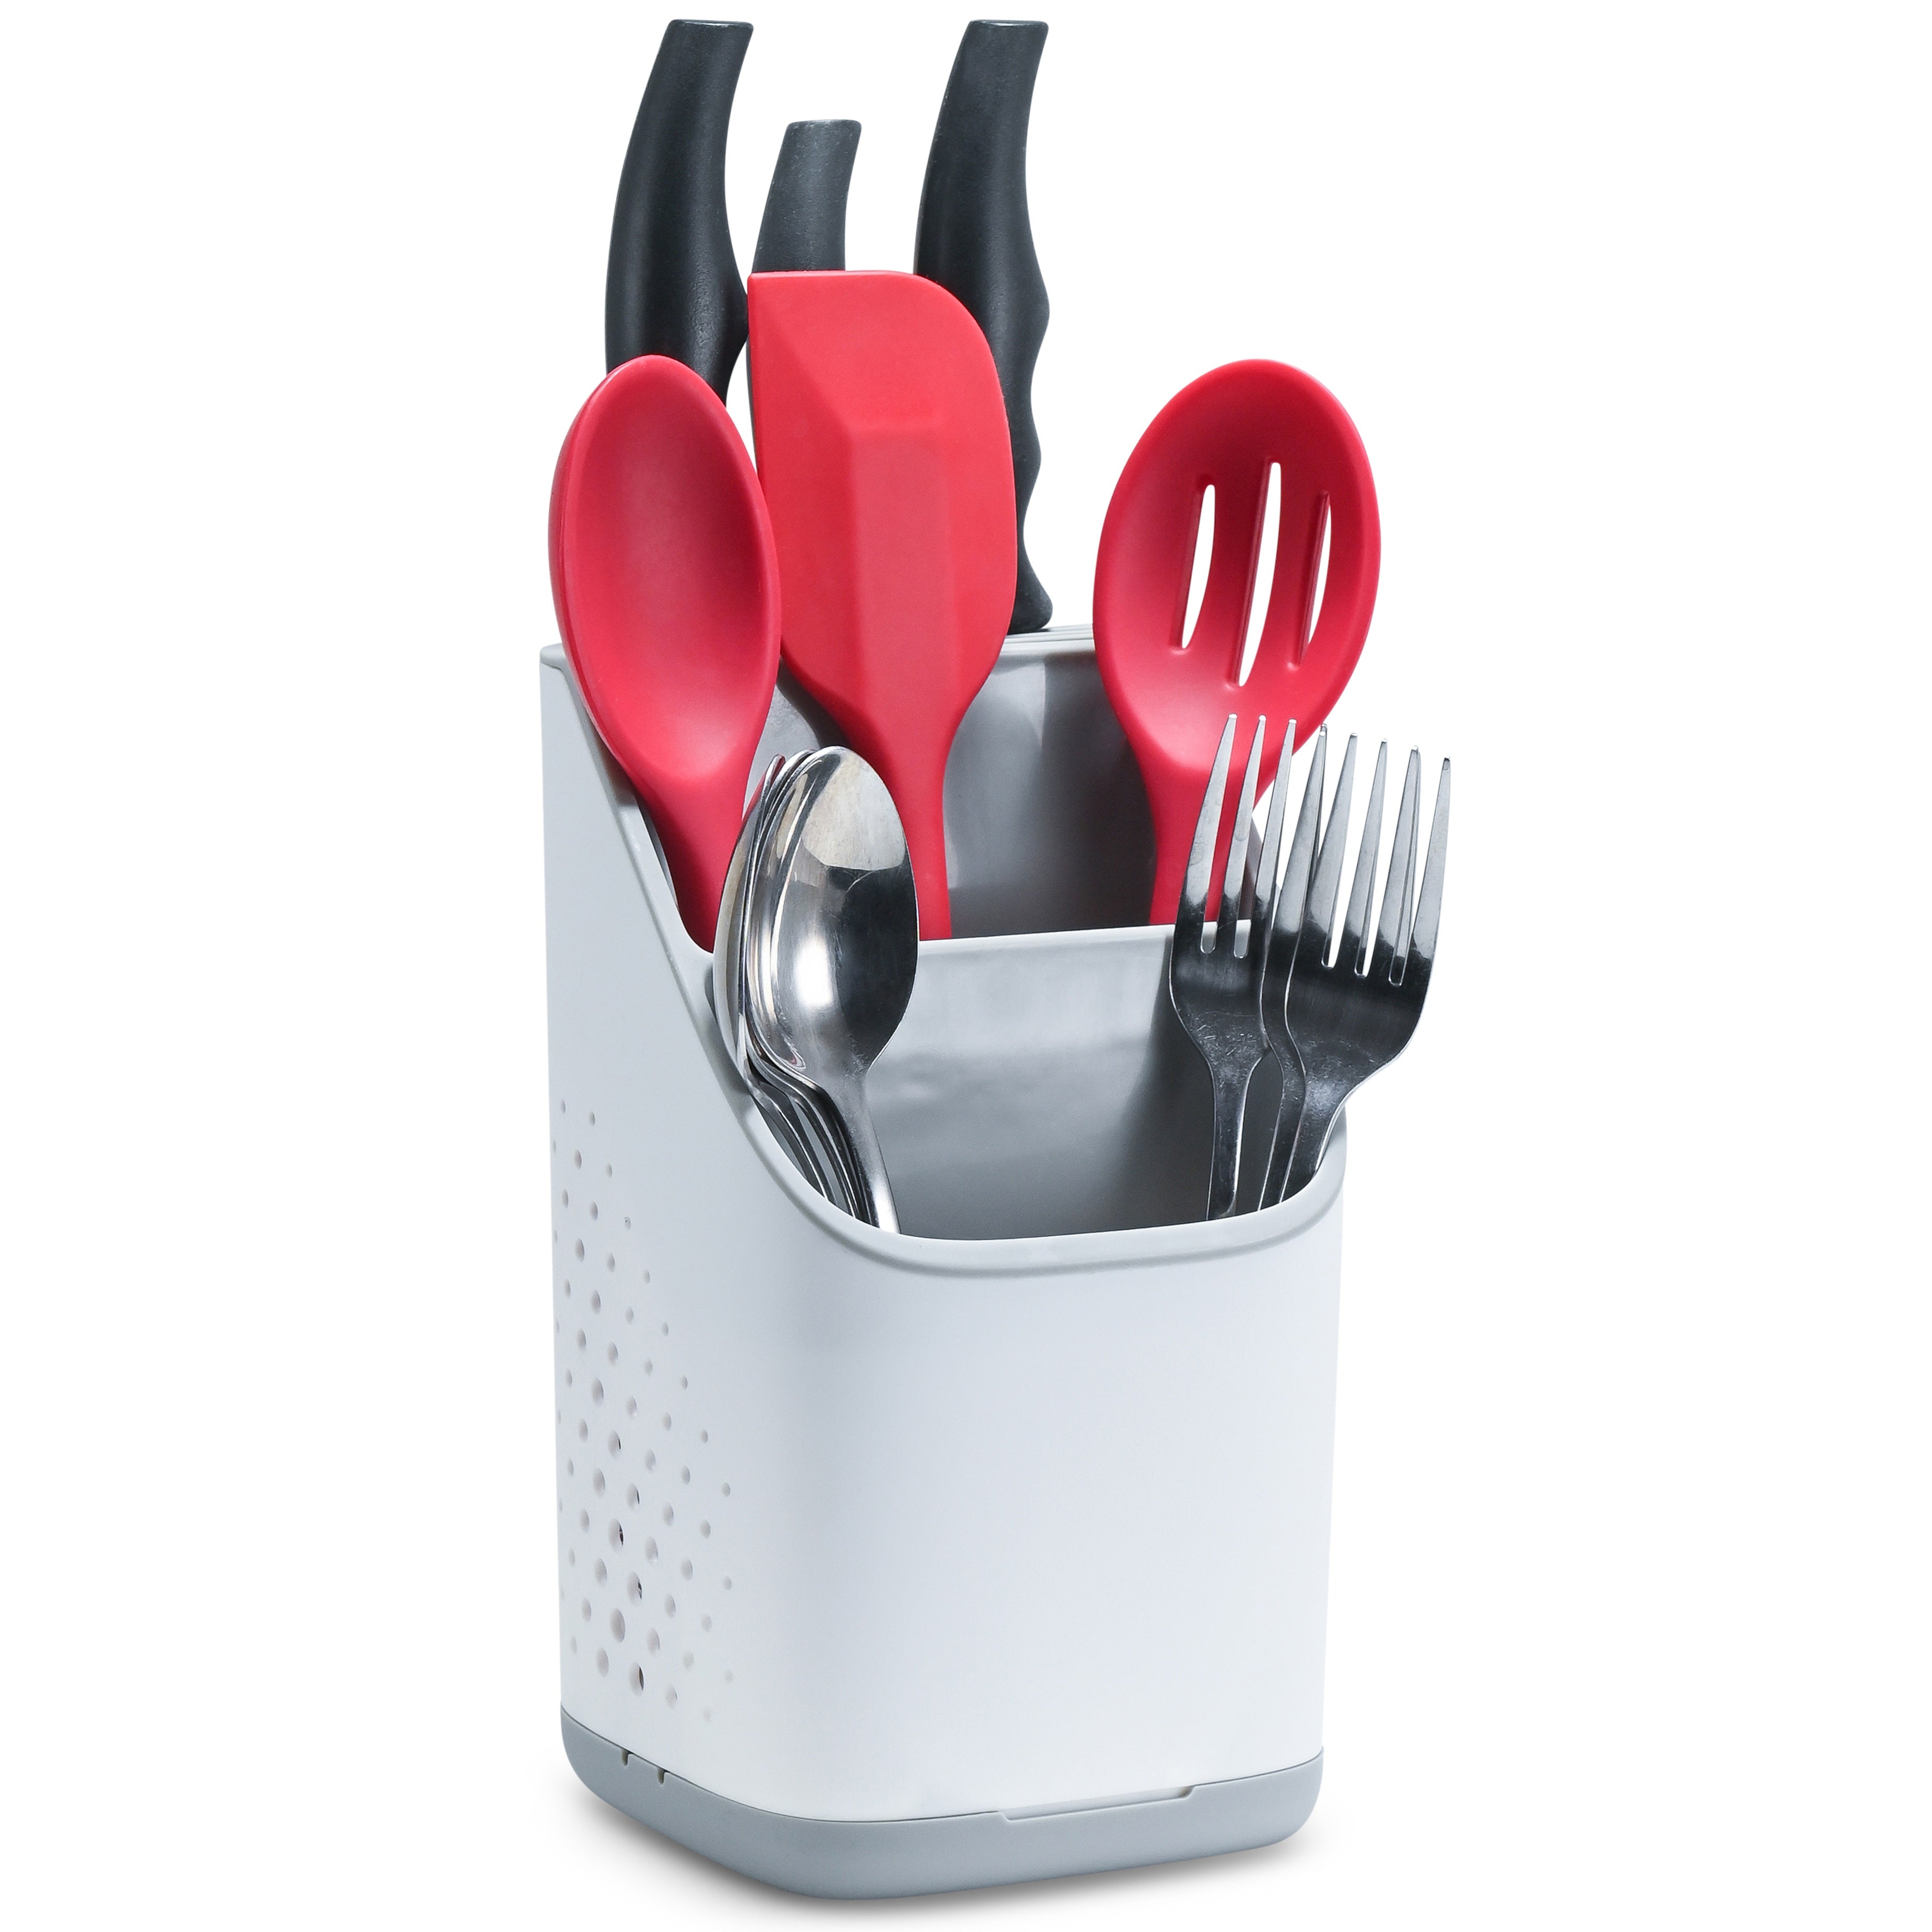 https://cdn.shopify.com/s/files/1/2091/6511/products/cheer-collection-utensil-organizer-caddy-and-drying-rack-with-drip-tray-247999.jpg?v=1671777077